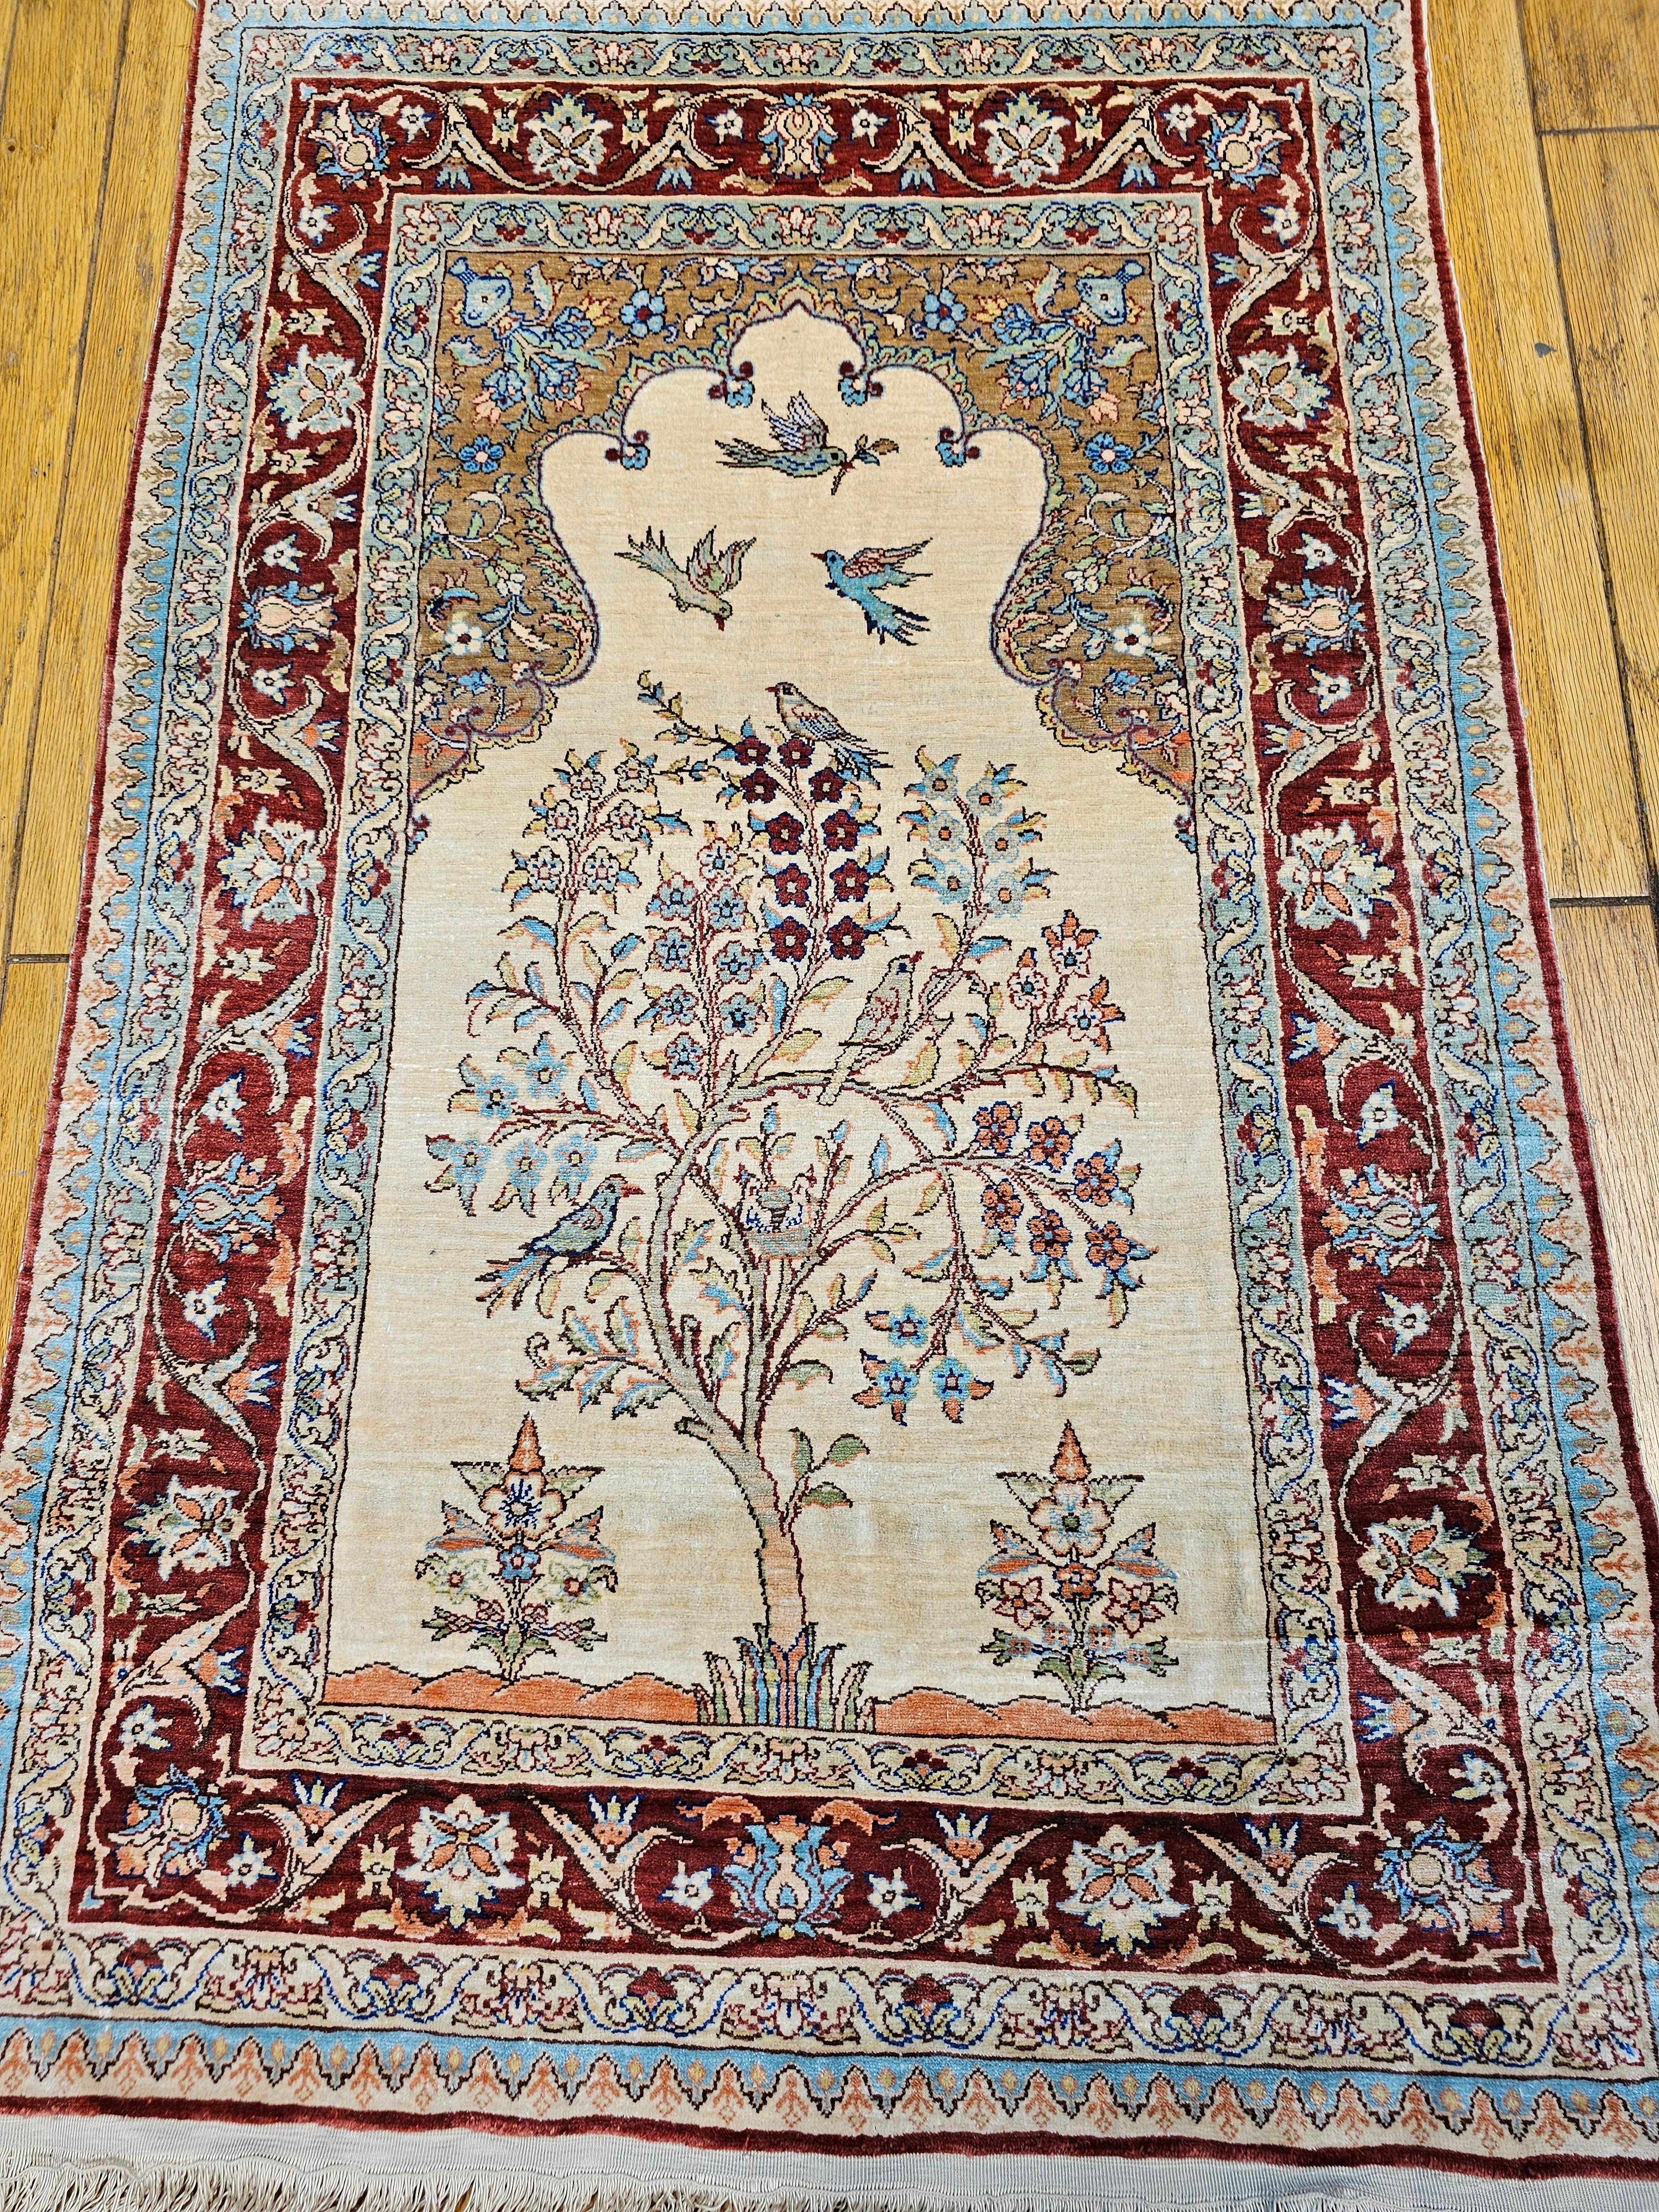  A beautiful all-silk Turkish Kayseri pictorial rug in a 